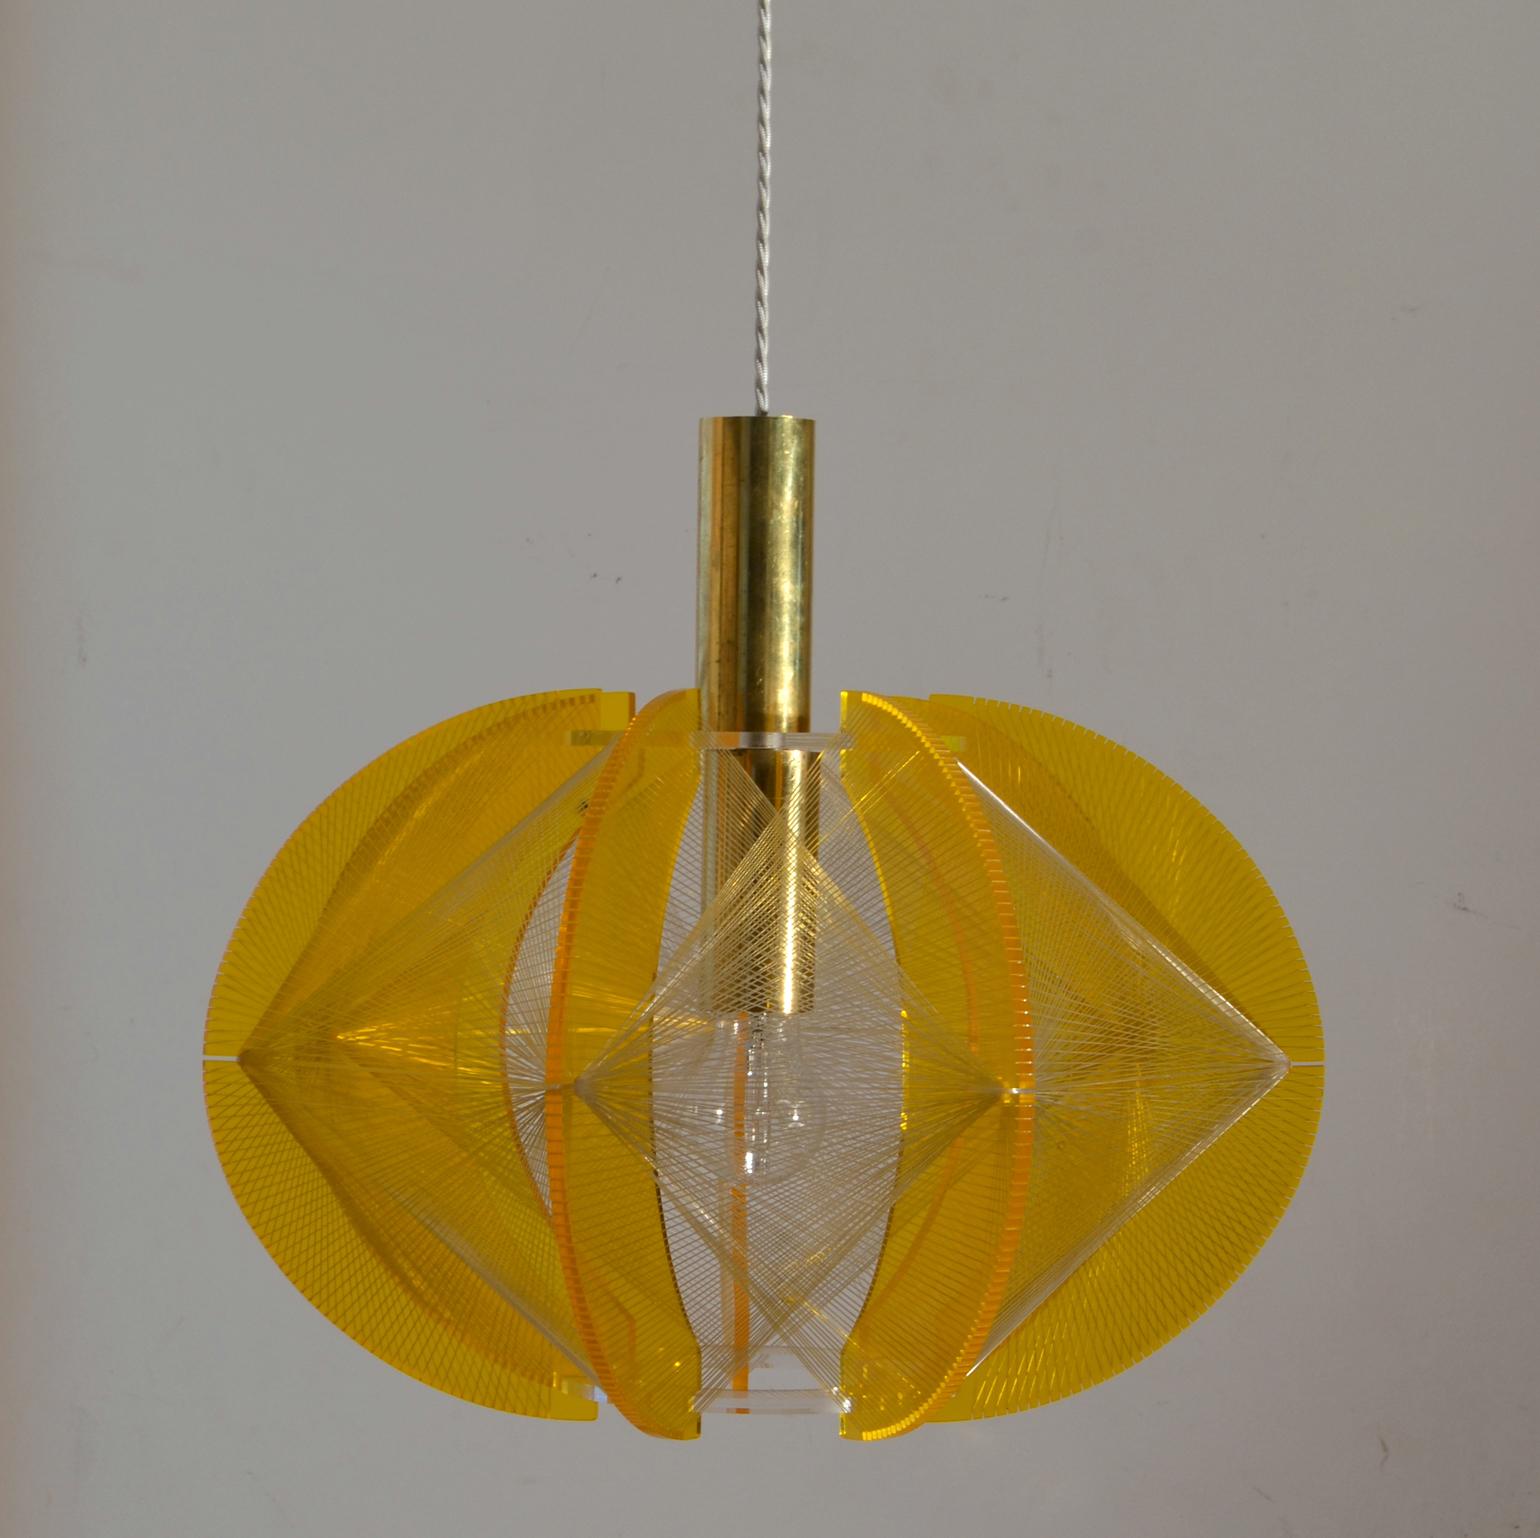 Sculptural lamps made of perspex and transparent wire accompanied brass internal fittings by by Paul Segon for Sompex. He was influenced by the Pioneer, Avant Garde artist and sculptor Naum Gabo (1890–1977). These lamps are monumental as a group